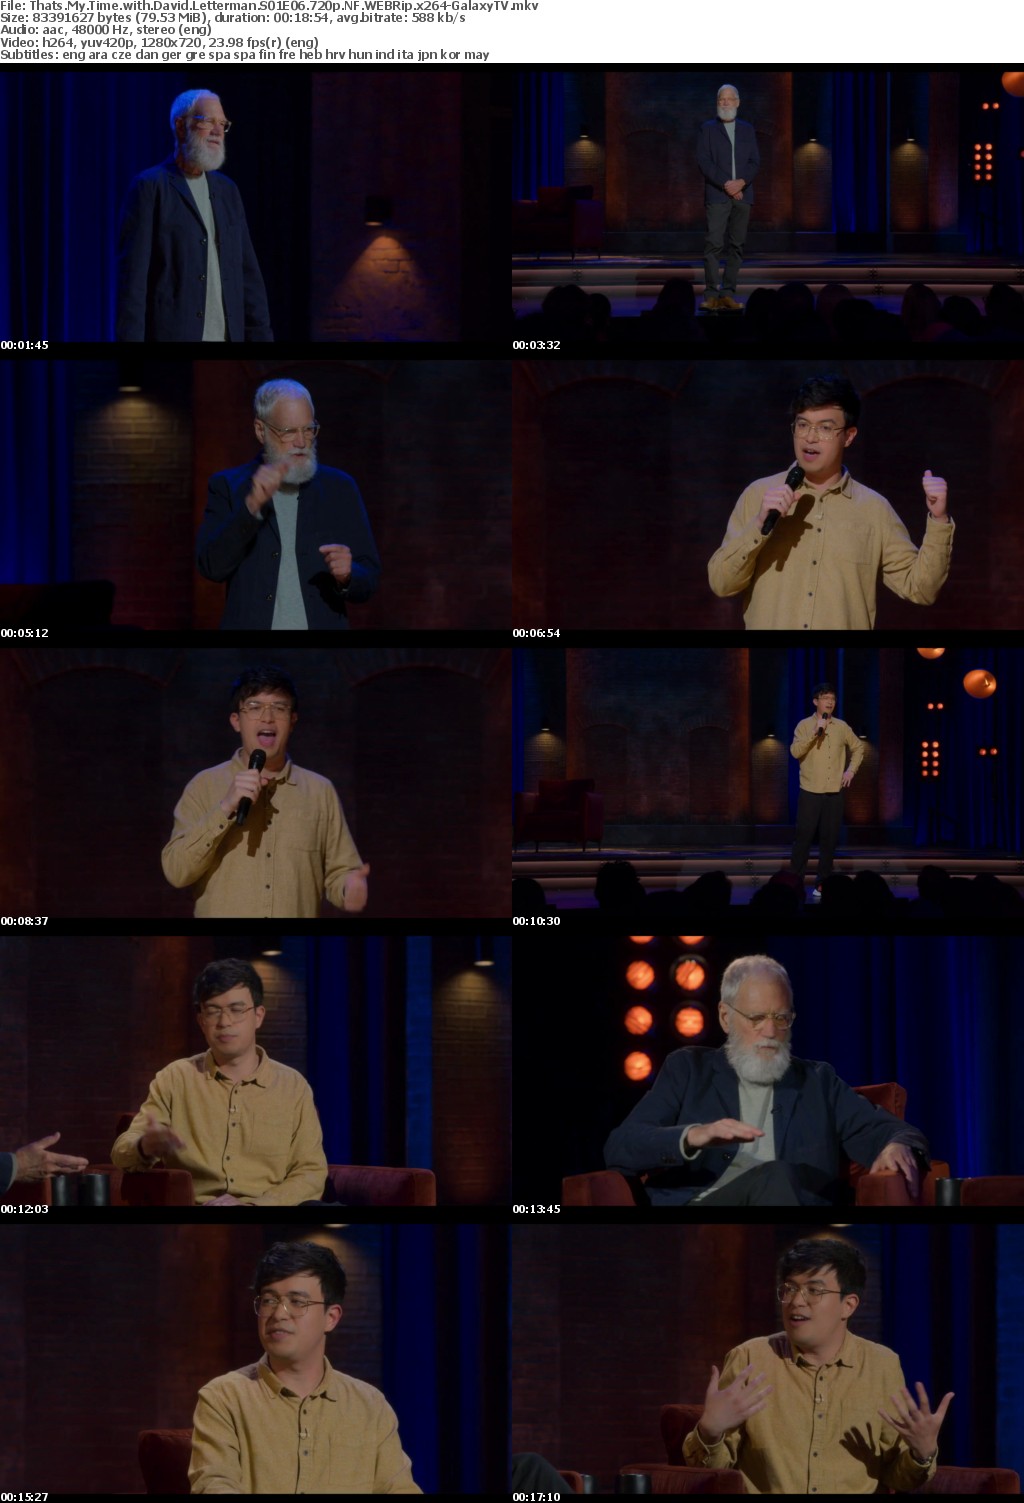 Thats My Time with David Letterman S01 COMPLETE 720p NF WEBRip x264-GalaxyTV